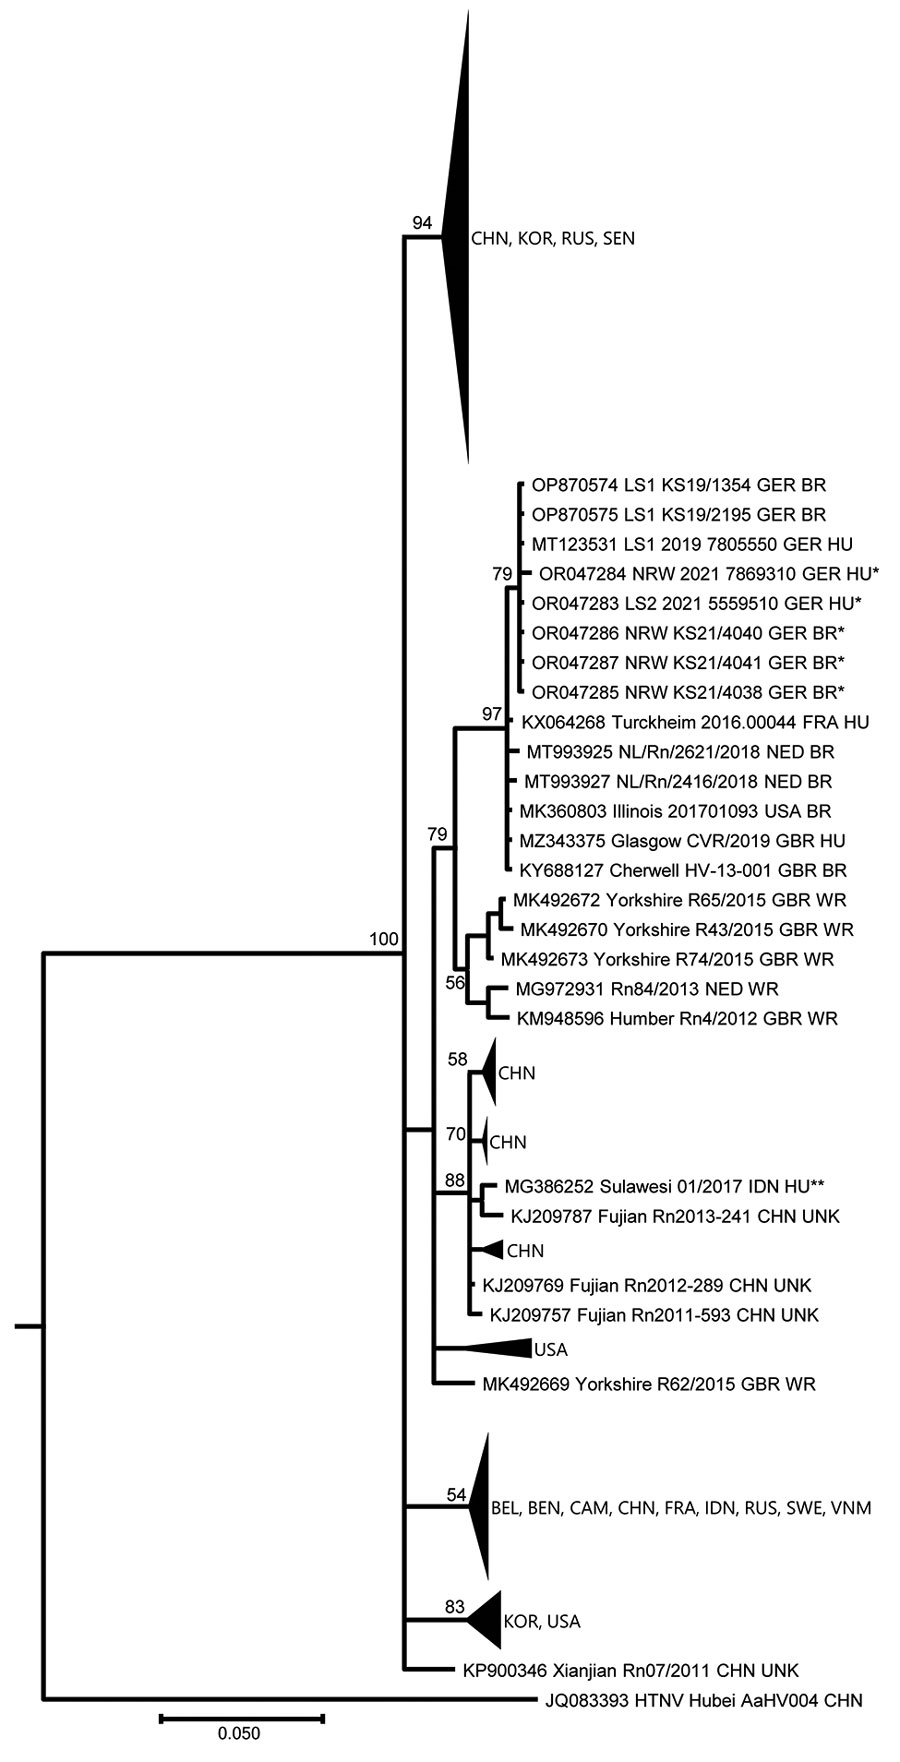 Phylogenetic tree of partial large segment Seoul virus sequences from humans and rats, Germany. Segments were 412-nt long, positions nt 2919–3330 based on reference sequence (KM948594_Cherwell_GBR_BR). The partial large segment Bayesian tree was reconstructed using 20 million generations and the Hasegawa-Kishino-Yano substitution model with gamma distribution and invariant sites. Single asterisks indicate sequences from this study, denoted by their GenBank accession numbers. Double asterisks indicate sequence from the imported Seoul virus case from Indonesia (9). Aa, Apodemus agrarius; BEL, Belgium; BEN, Benin; BR, breeder rat (includes feeder, lab, and pet rats); CAM, Cambodia; CHN, China; FRA, France; GBR, Great Britain; GER, Germany; HTNV, Hantaan virus; HU, human; IDN, Indonesia; KOR, Korea; L, large segment; NED, the Netherlands; Rn, Rattus norvegicus; RUS, Russia; SEN, Senegal; SEOV, Seoul virus; SWE, Sweden; UNK, unknown wild or breeder rat; USA, United States of America; VNM, Vietnam; WR, wild rat.